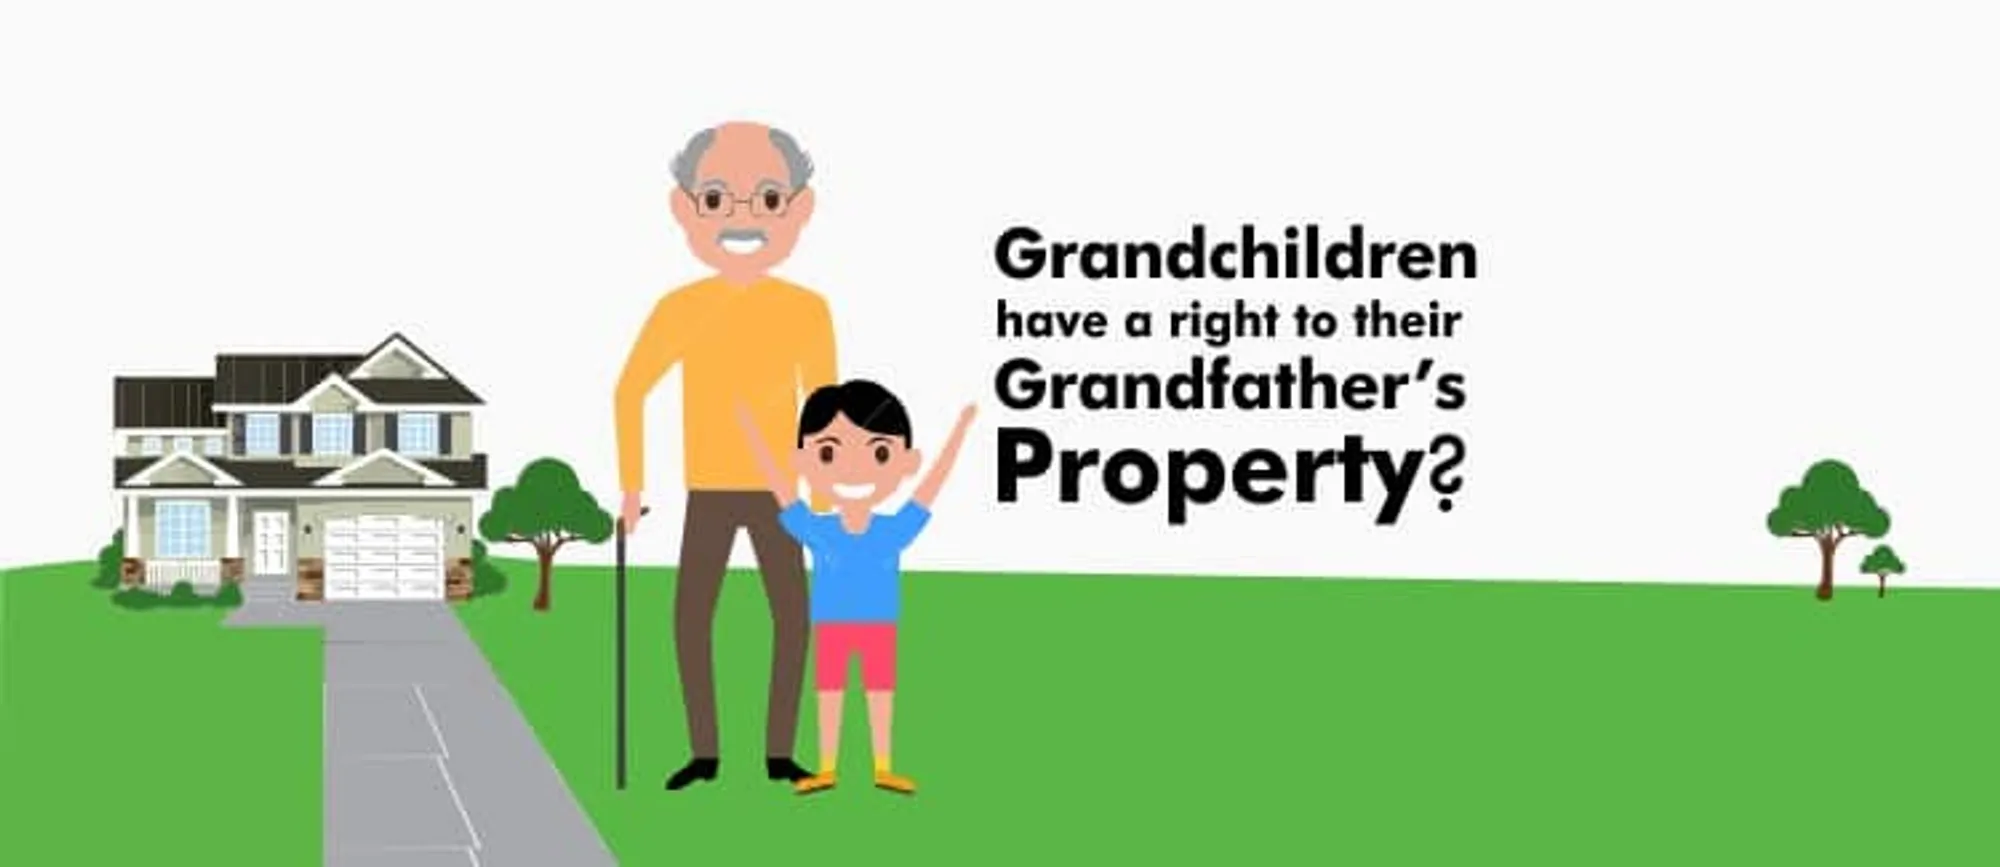 Do grandchildren have a right to their grandfather’s property?